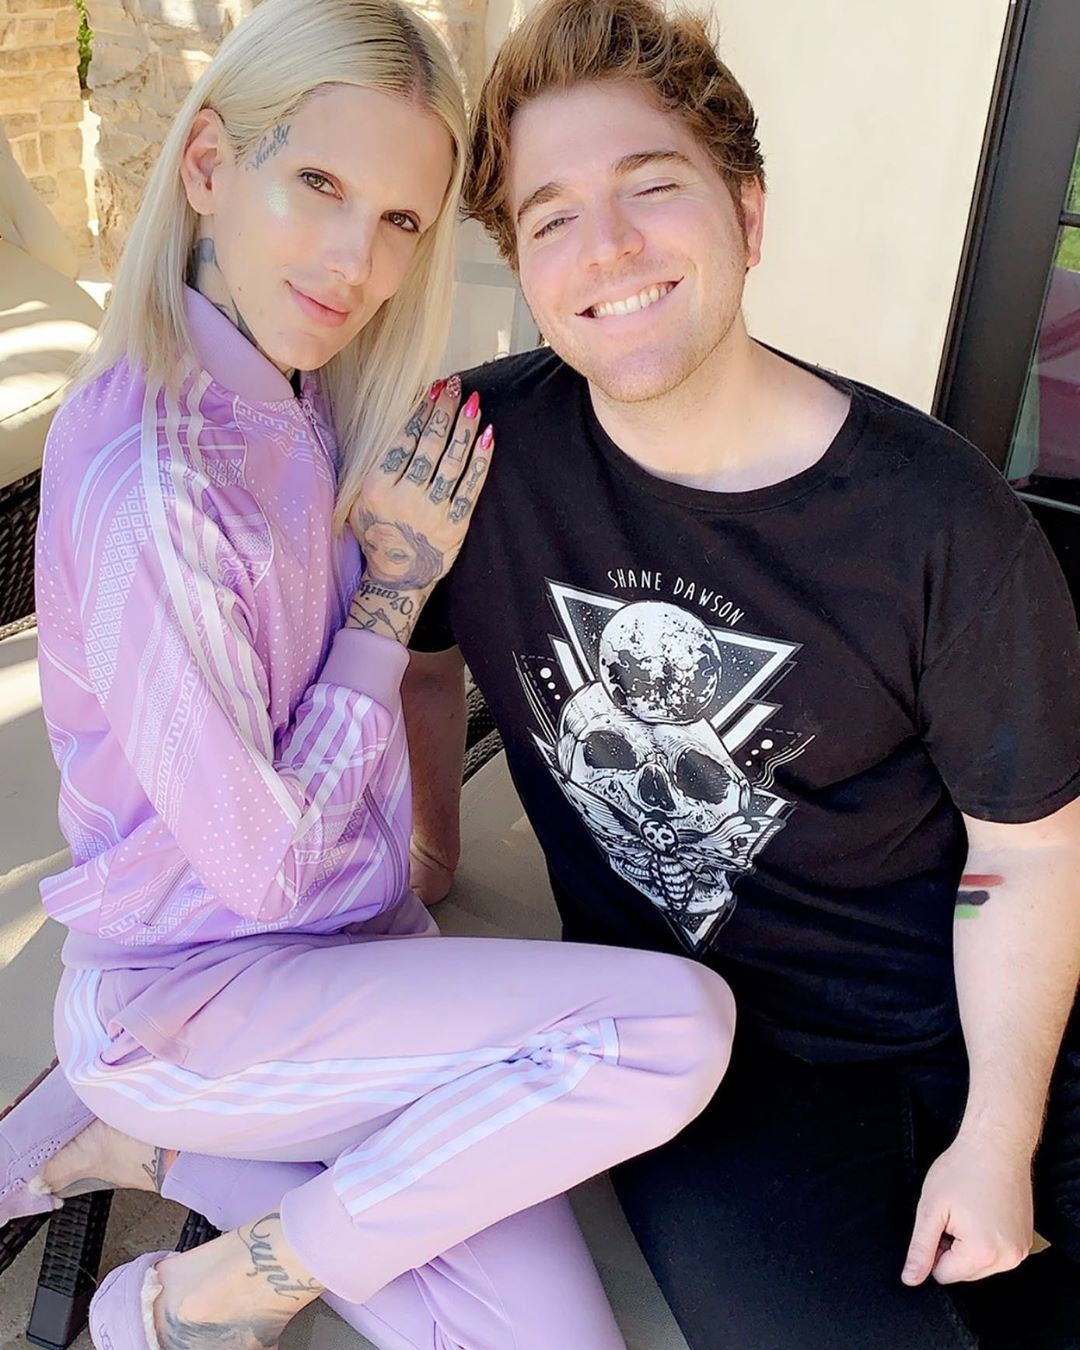 Kidding Sex - Shane Dawson and Jeffree Star Would Like You to Forget Their Pasts ...